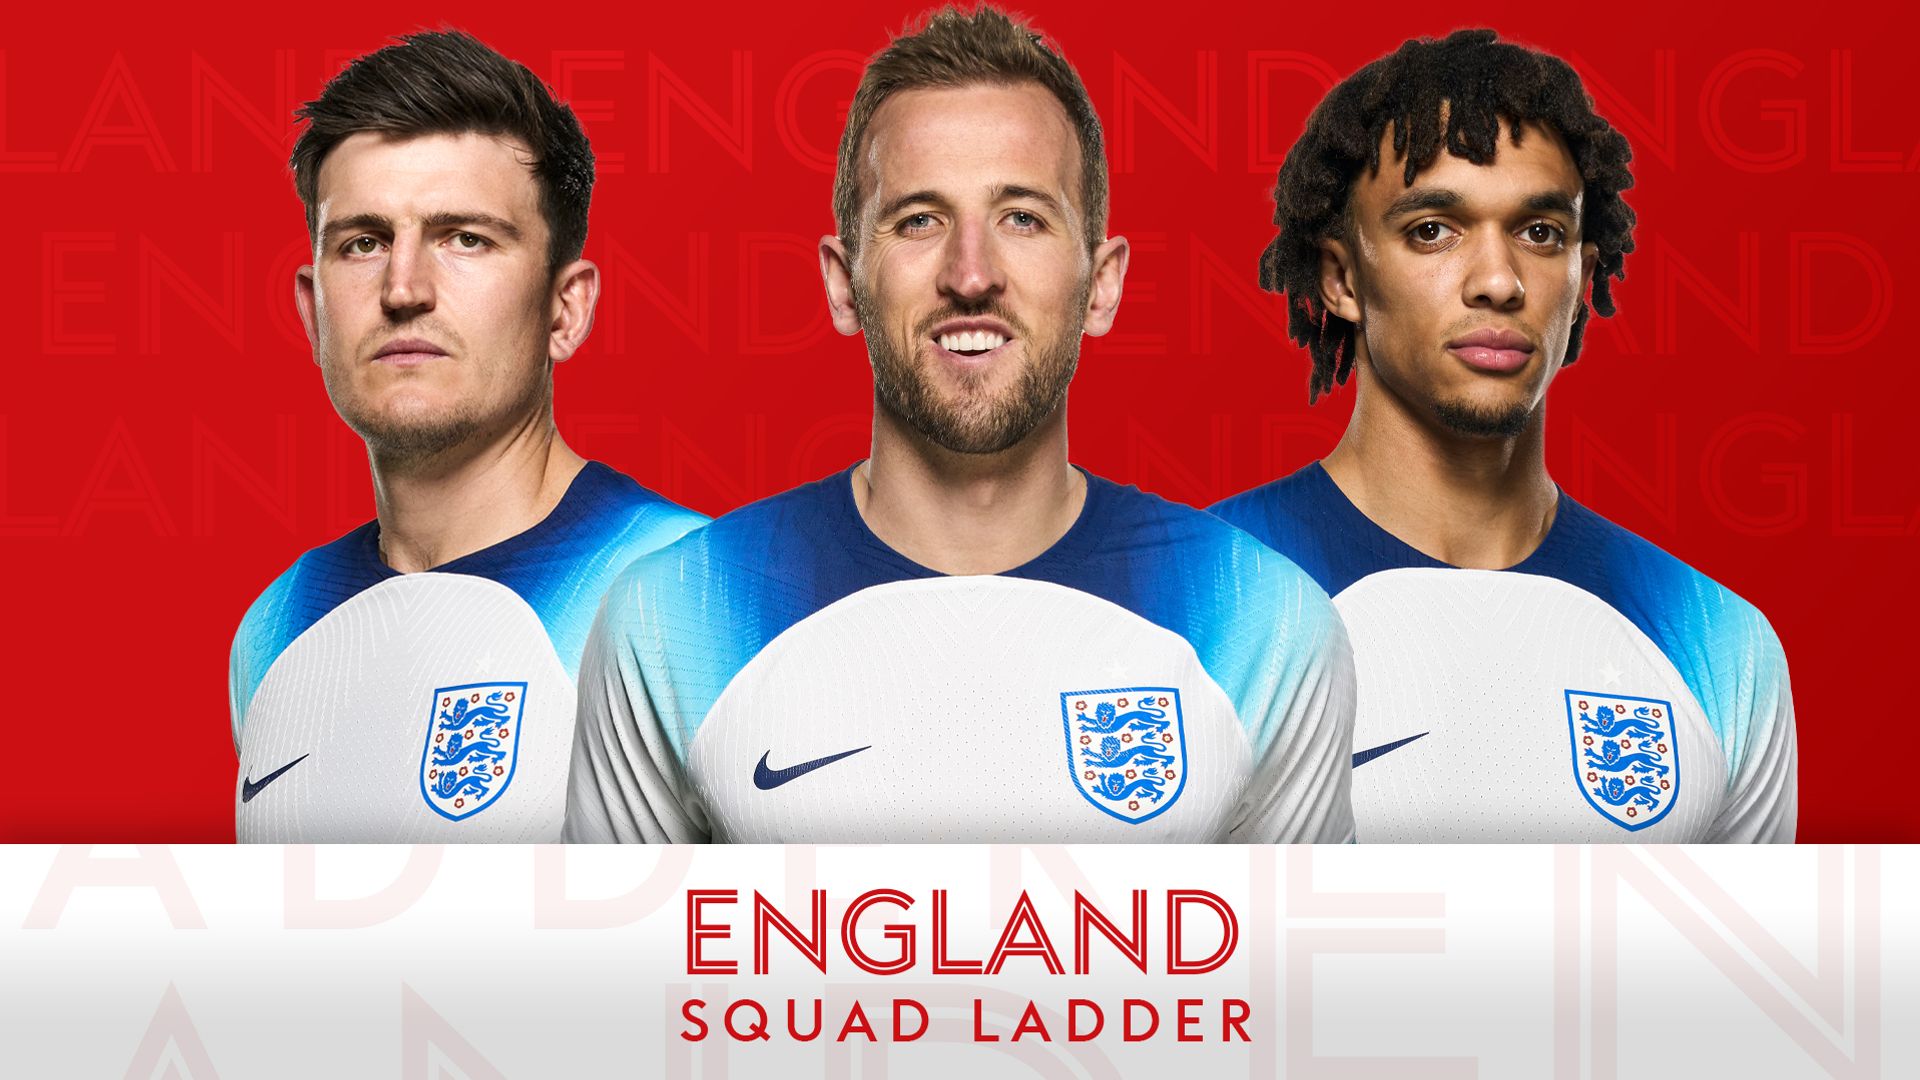 England World Cup squad ladder: Maguire still on the plane; Trent slipping